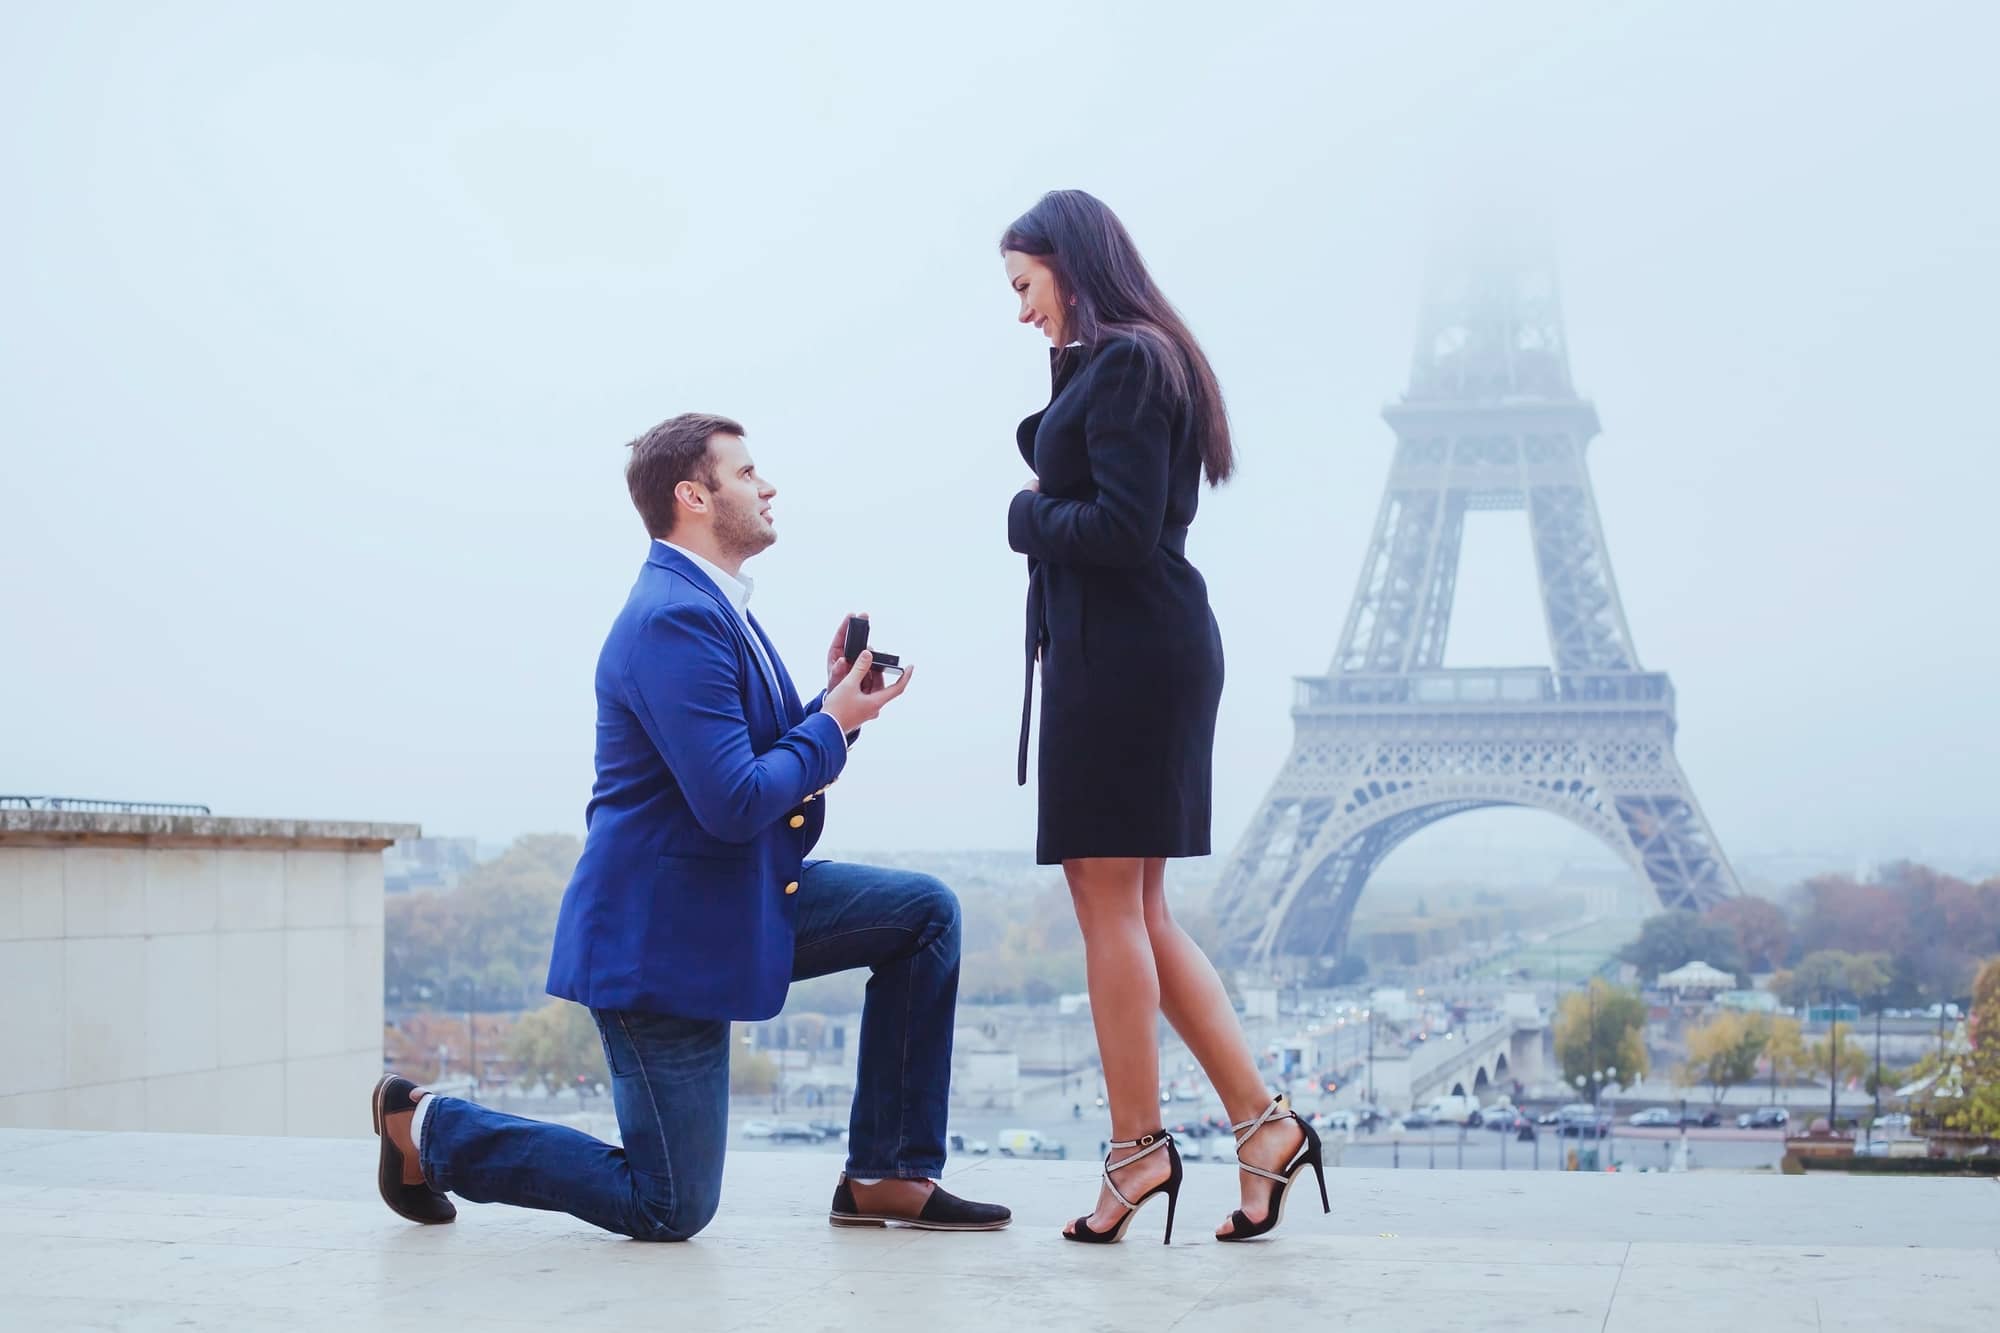 A man gets down on one knee to propose to her girlfriend